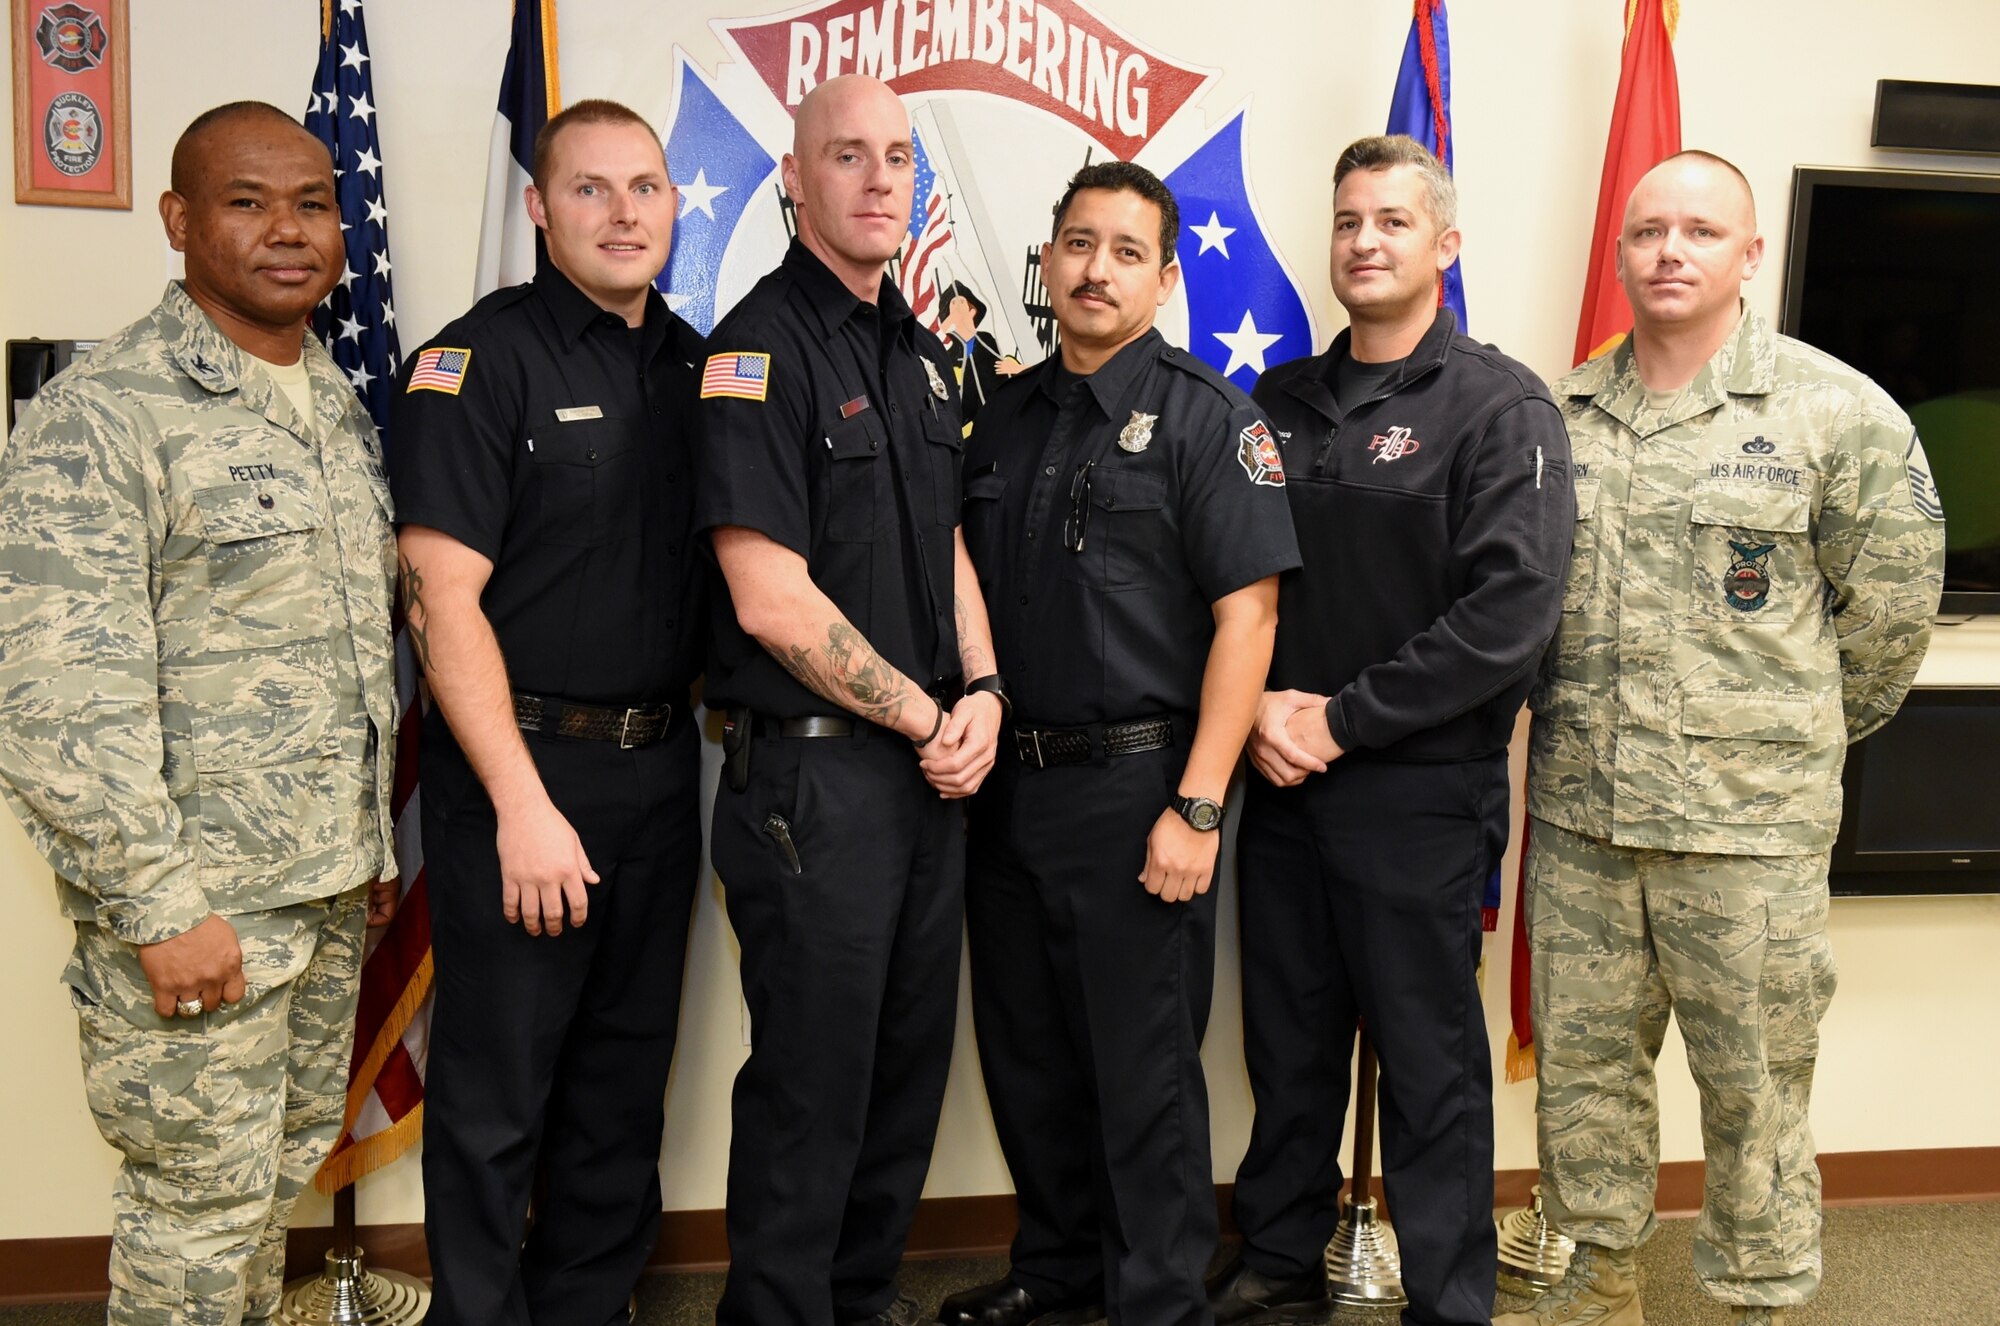 Col. George Petty, Air Force Space Command Civil Engineer Readiness and Emergency Management chief, left, and Master Sgt. Jayme Scammerhorn, AFSPC command fire chief, right, congratulated four Team Buckley firefighters with the AFSPC Fire Emergency Services Save Certificate Nov. 20, 2014, at the fire department on Buckley Air Force Base, Colo. Recipients of the certificate were, from second to left, Brandon Elson, Kenneth Bradley, Carlos Hidalgo and Joseph Boscia. The four firefighters received the award for their lifesaving actions while responding to a major vehicle accident in October 2014. (U.S. Air Force photo by Tech. Sgt. Kali L. Gradishar/Released)